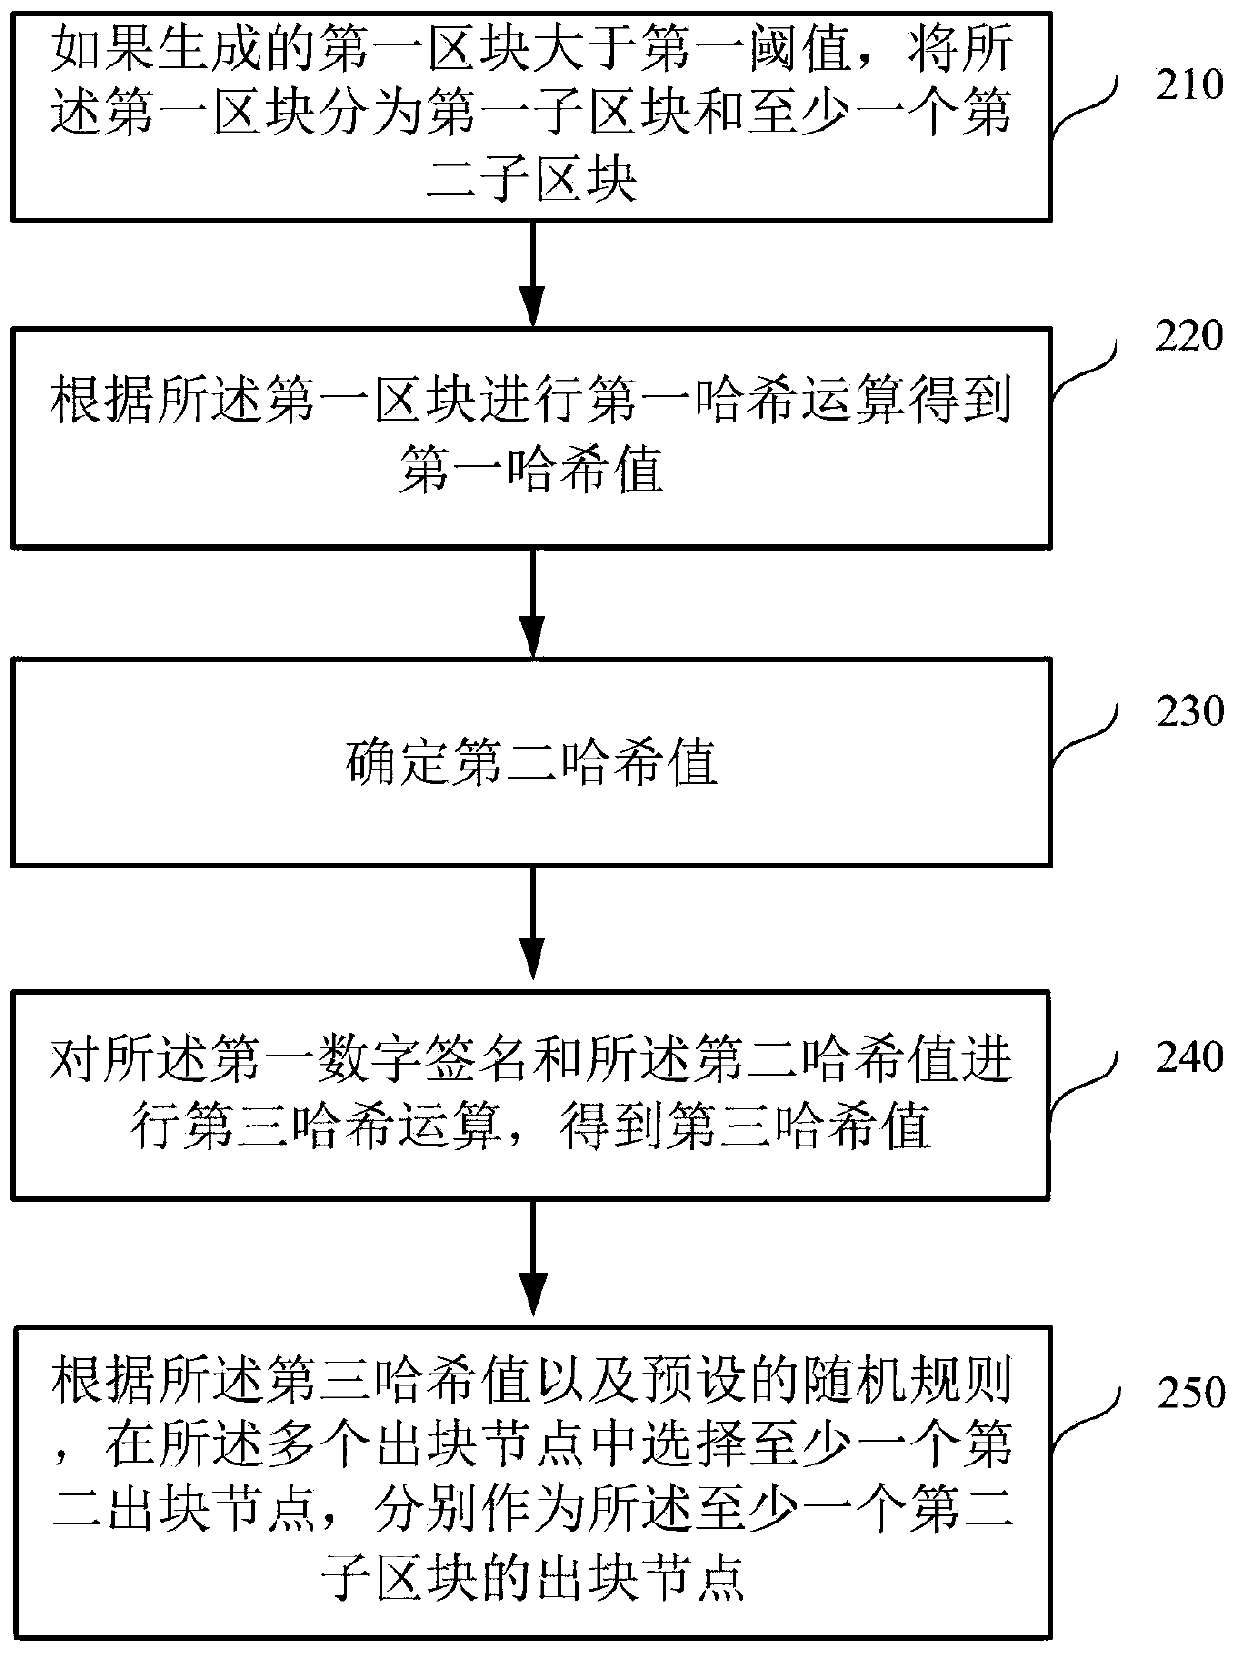 Block chain-based packaging method and device